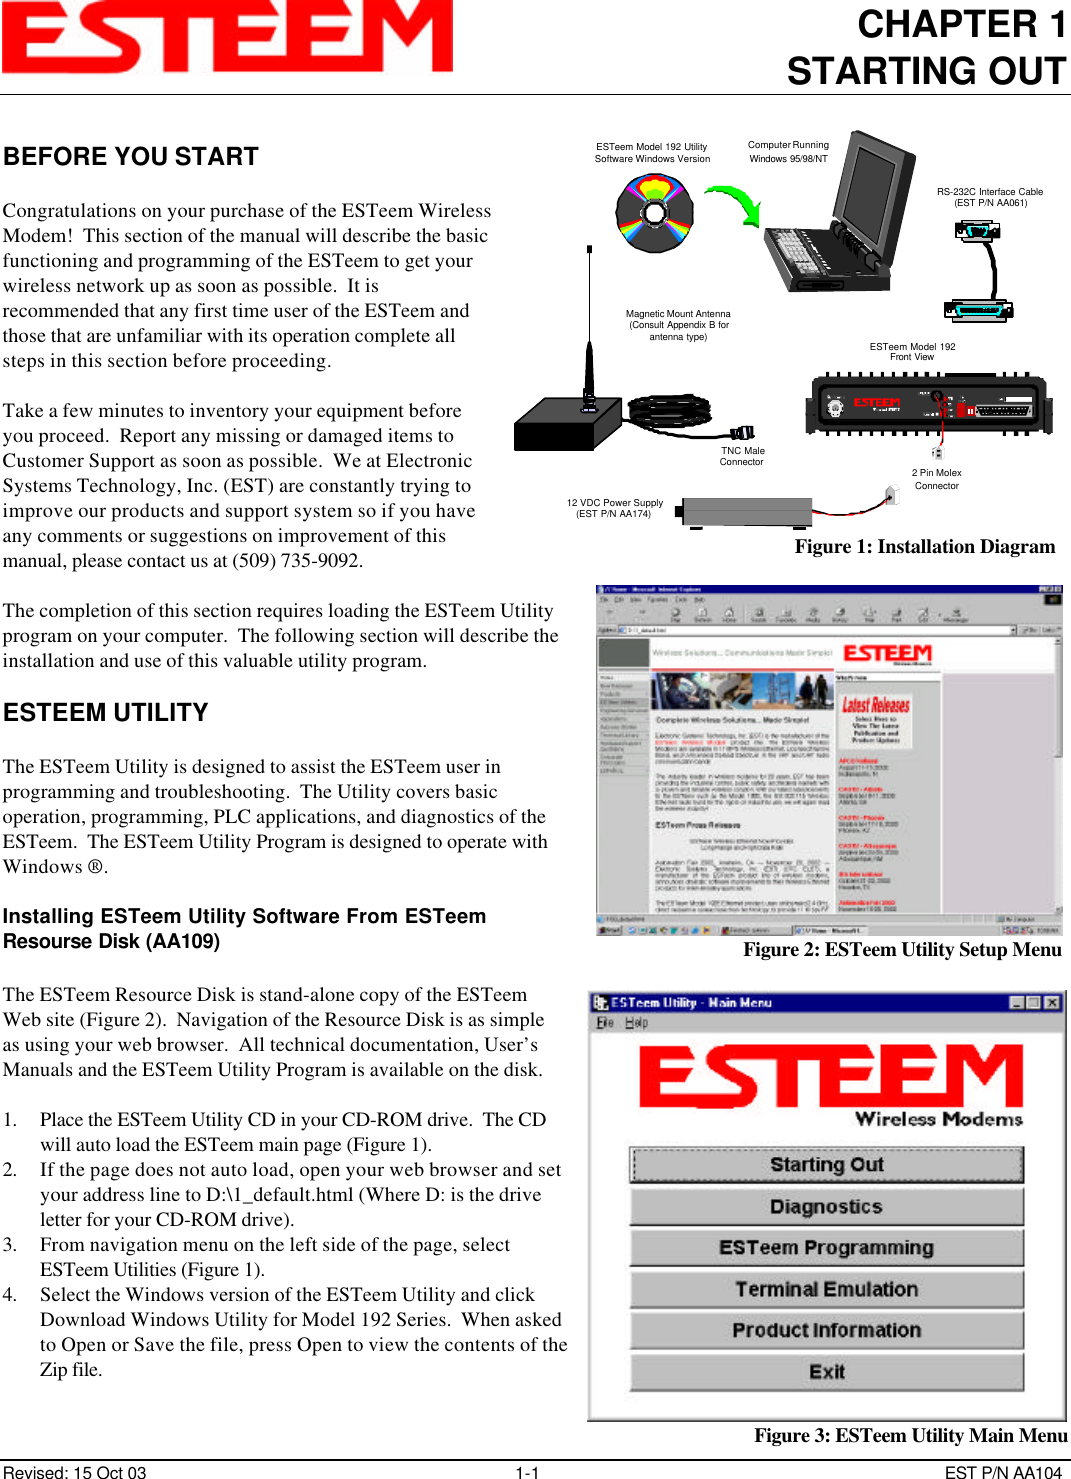 CHAPTER 1STARTING OUTRevised: 15 Oct 03 1-1 EST P/N AA104BEFORE YOU STARTCongratulations on your purchase of the ESTeem WirelessModem!  This section of the manual will describe the basicfunctioning and programming of the ESTeem to get yourwireless network up as soon as possible.  It isrecommended that any first time user of the ESTeem andthose that are unfamiliar with its operation complete allsteps in this section before proceeding.Take a few minutes to inventory your equipment beforeyou proceed.  Report any missing or damaged items toCustomer Support as soon as possible.  We at ElectronicSystems Technology, Inc. (EST) are constantly trying toimprove our products and support system so if you haveany comments or suggestions on improvement of thismanual, please contact us at (509) 735-9092.The completion of this section requires loading the ESTeem Utilityprogram on your computer.  The following section will describe theinstallation and use of this valuable utility program.ESTEEM UTILITYThe ESTeem Utility is designed to assist the ESTeem user inprogramming and troubleshooting.  The Utility covers basicoperation, programming, PLC applications, and diagnostics of theESTeem.  The ESTeem Utility Program is designed to operate withWindows ®.Installing ESTeem Utility Software From ESTeemResourse Disk (AA109)The ESTeem Resource Disk is stand-alone copy of the ESTeemWeb site (Figure 2).  Navigation of the Resource Disk is as simpleas using your web browser.  All technical documentation, User’sManuals and the ESTeem Utility Program is available on the disk.1. Place the ESTeem Utility CD in your CD-ROM drive.  The CDwill auto load the ESTeem main page (Figure 1).2. If the page does not auto load, open your web browser and setyour address line to D:\1_default.html (Where D: is the driveletter for your CD-ROM drive).3. From navigation menu on the left side of the page, selectESTeem Utilities (Figure 1).4. Select the Windows version of the ESTeem Utility and clickDownload Windows Utility for Model 192 Series.  When askedto Open or Save the file, press Open to view the contents of theZip file.RS-232C Interface Cable(EST P/N AA061)12 VDC Power Supply(EST P/N AA174)2 Pin MolexConnectorESTeem Model 192Front ViewESTeem Model 192 UtilitySoftware Windows VersionComputer Running Windows 95/98/NTTNC MaleConnectorMagnetic Mount Antenna(Consult Appendix B forantenna type)Figure 1: Installation DiagramFigure 2: ESTeem Utility Setup MenuFigure 3: ESTeem Utility Main Menu